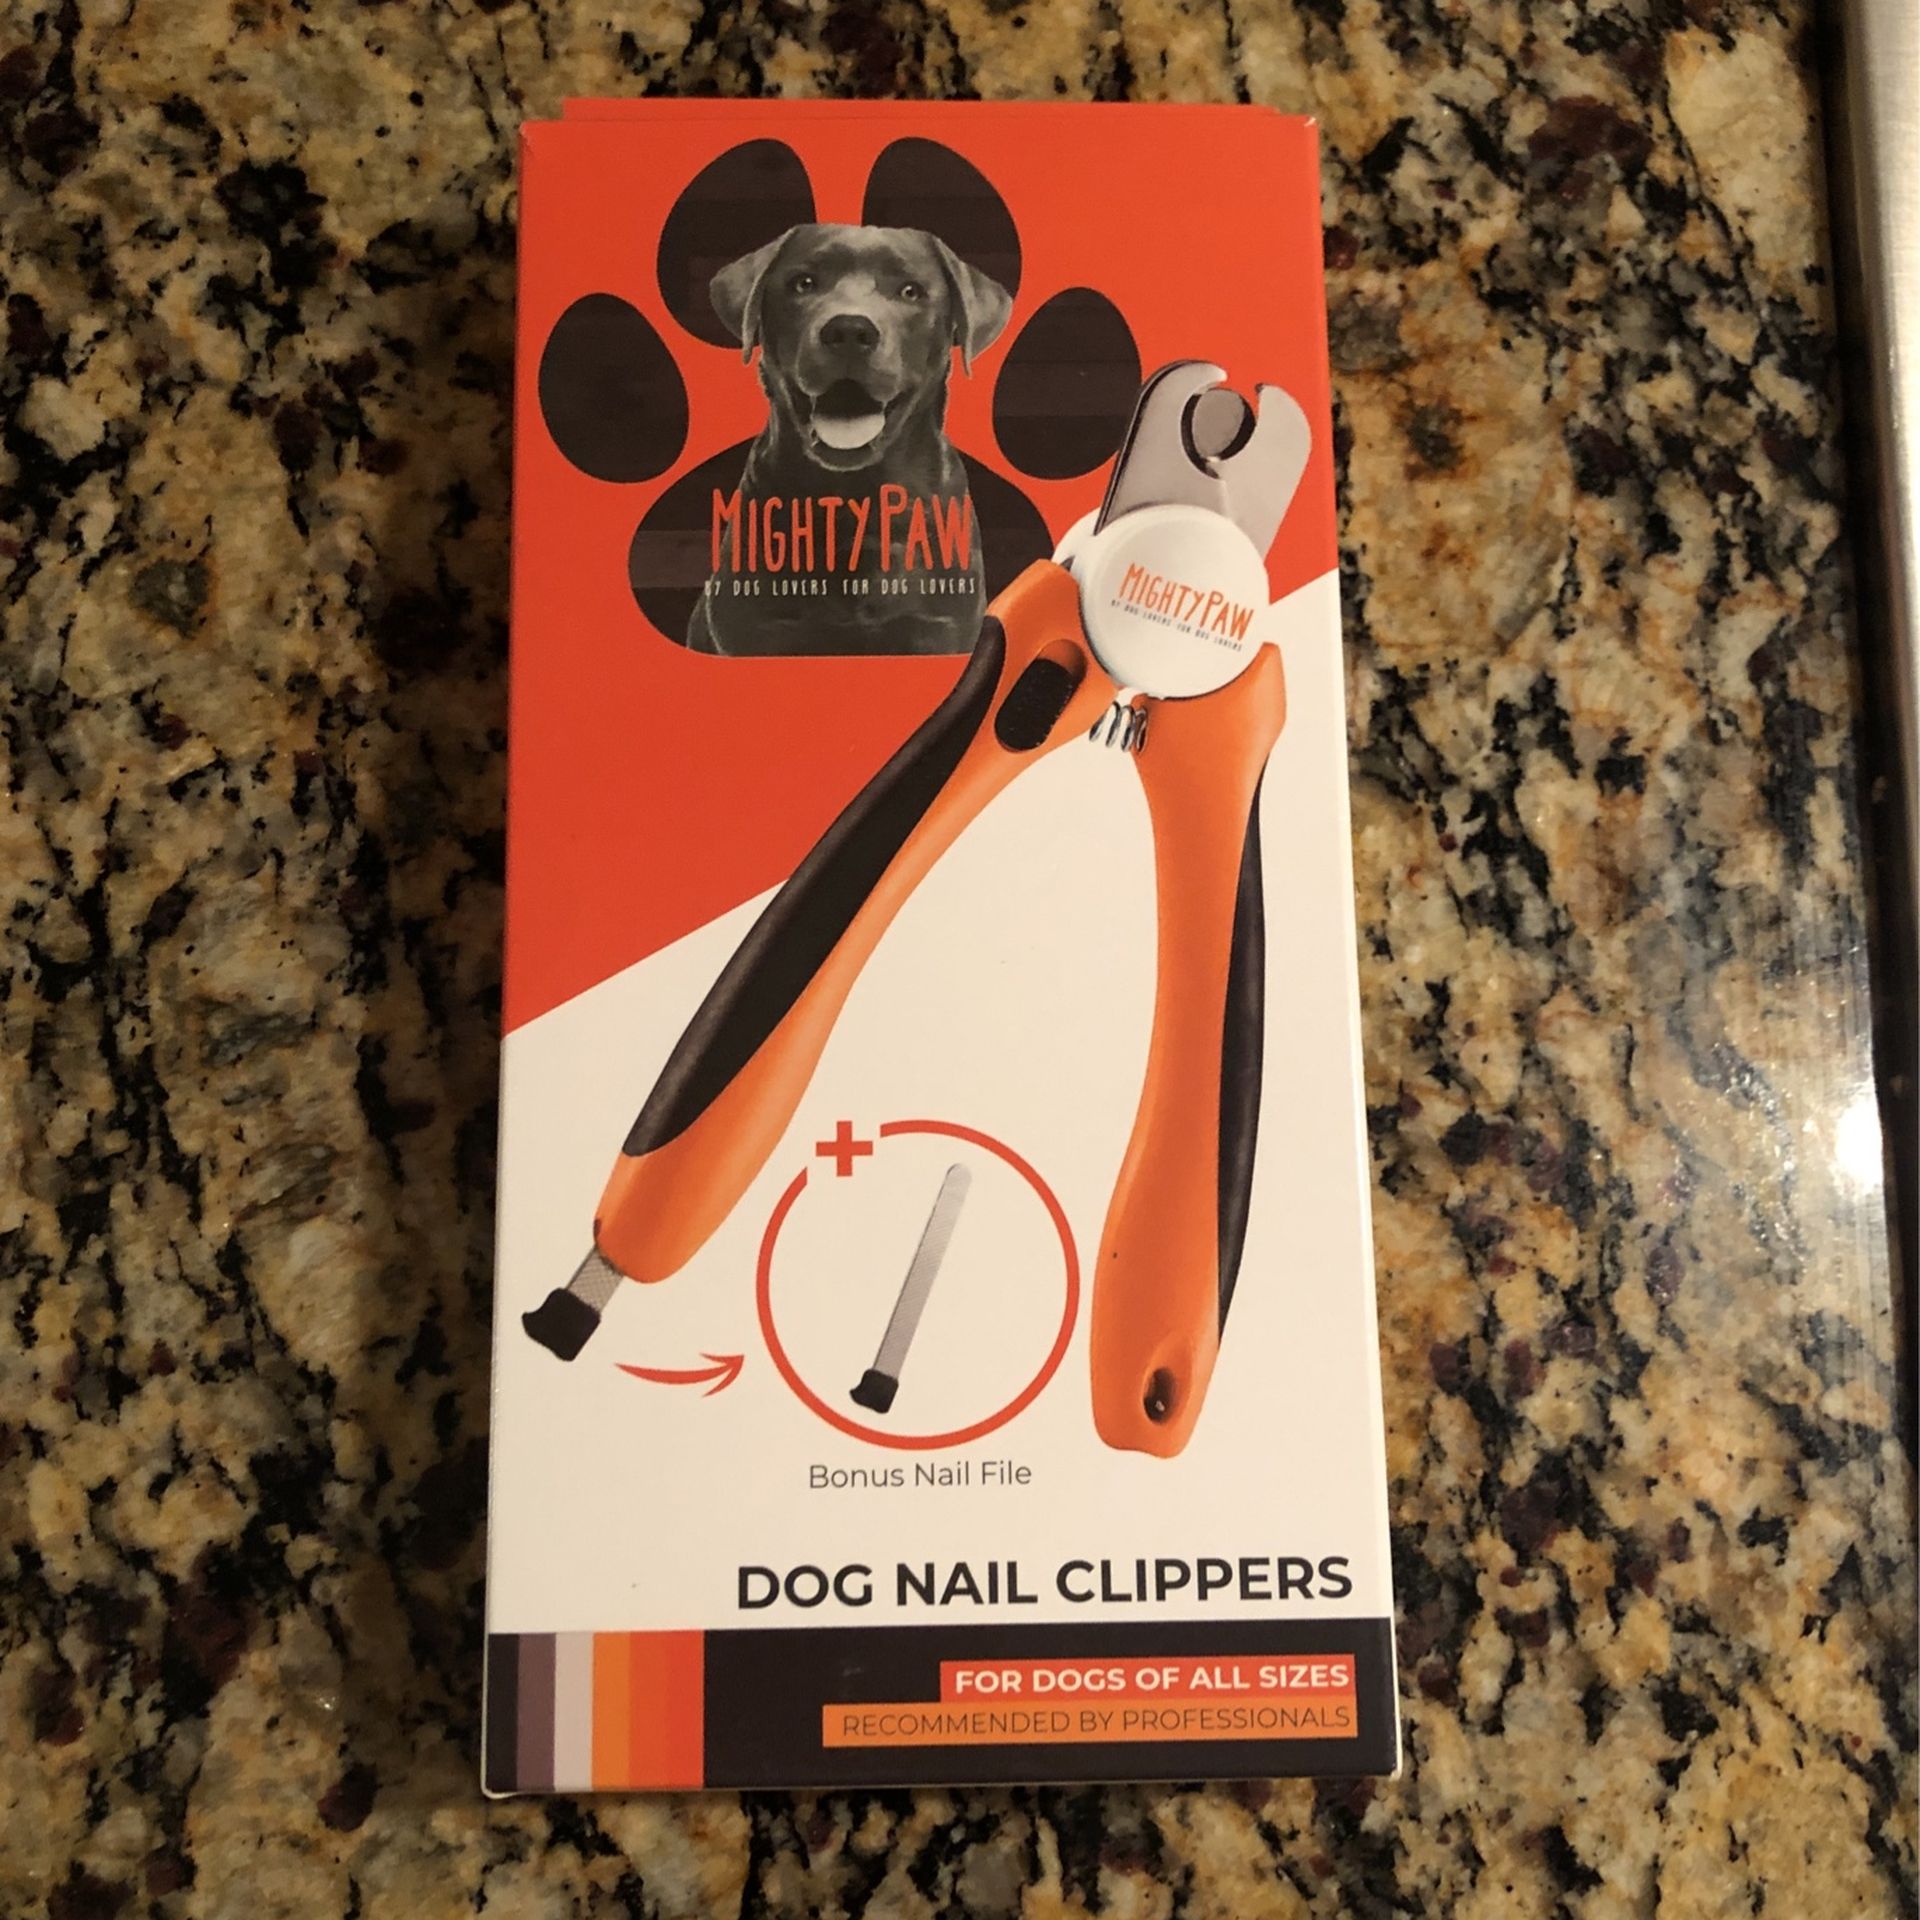 Mighty Paw Dog Nail Clippers 